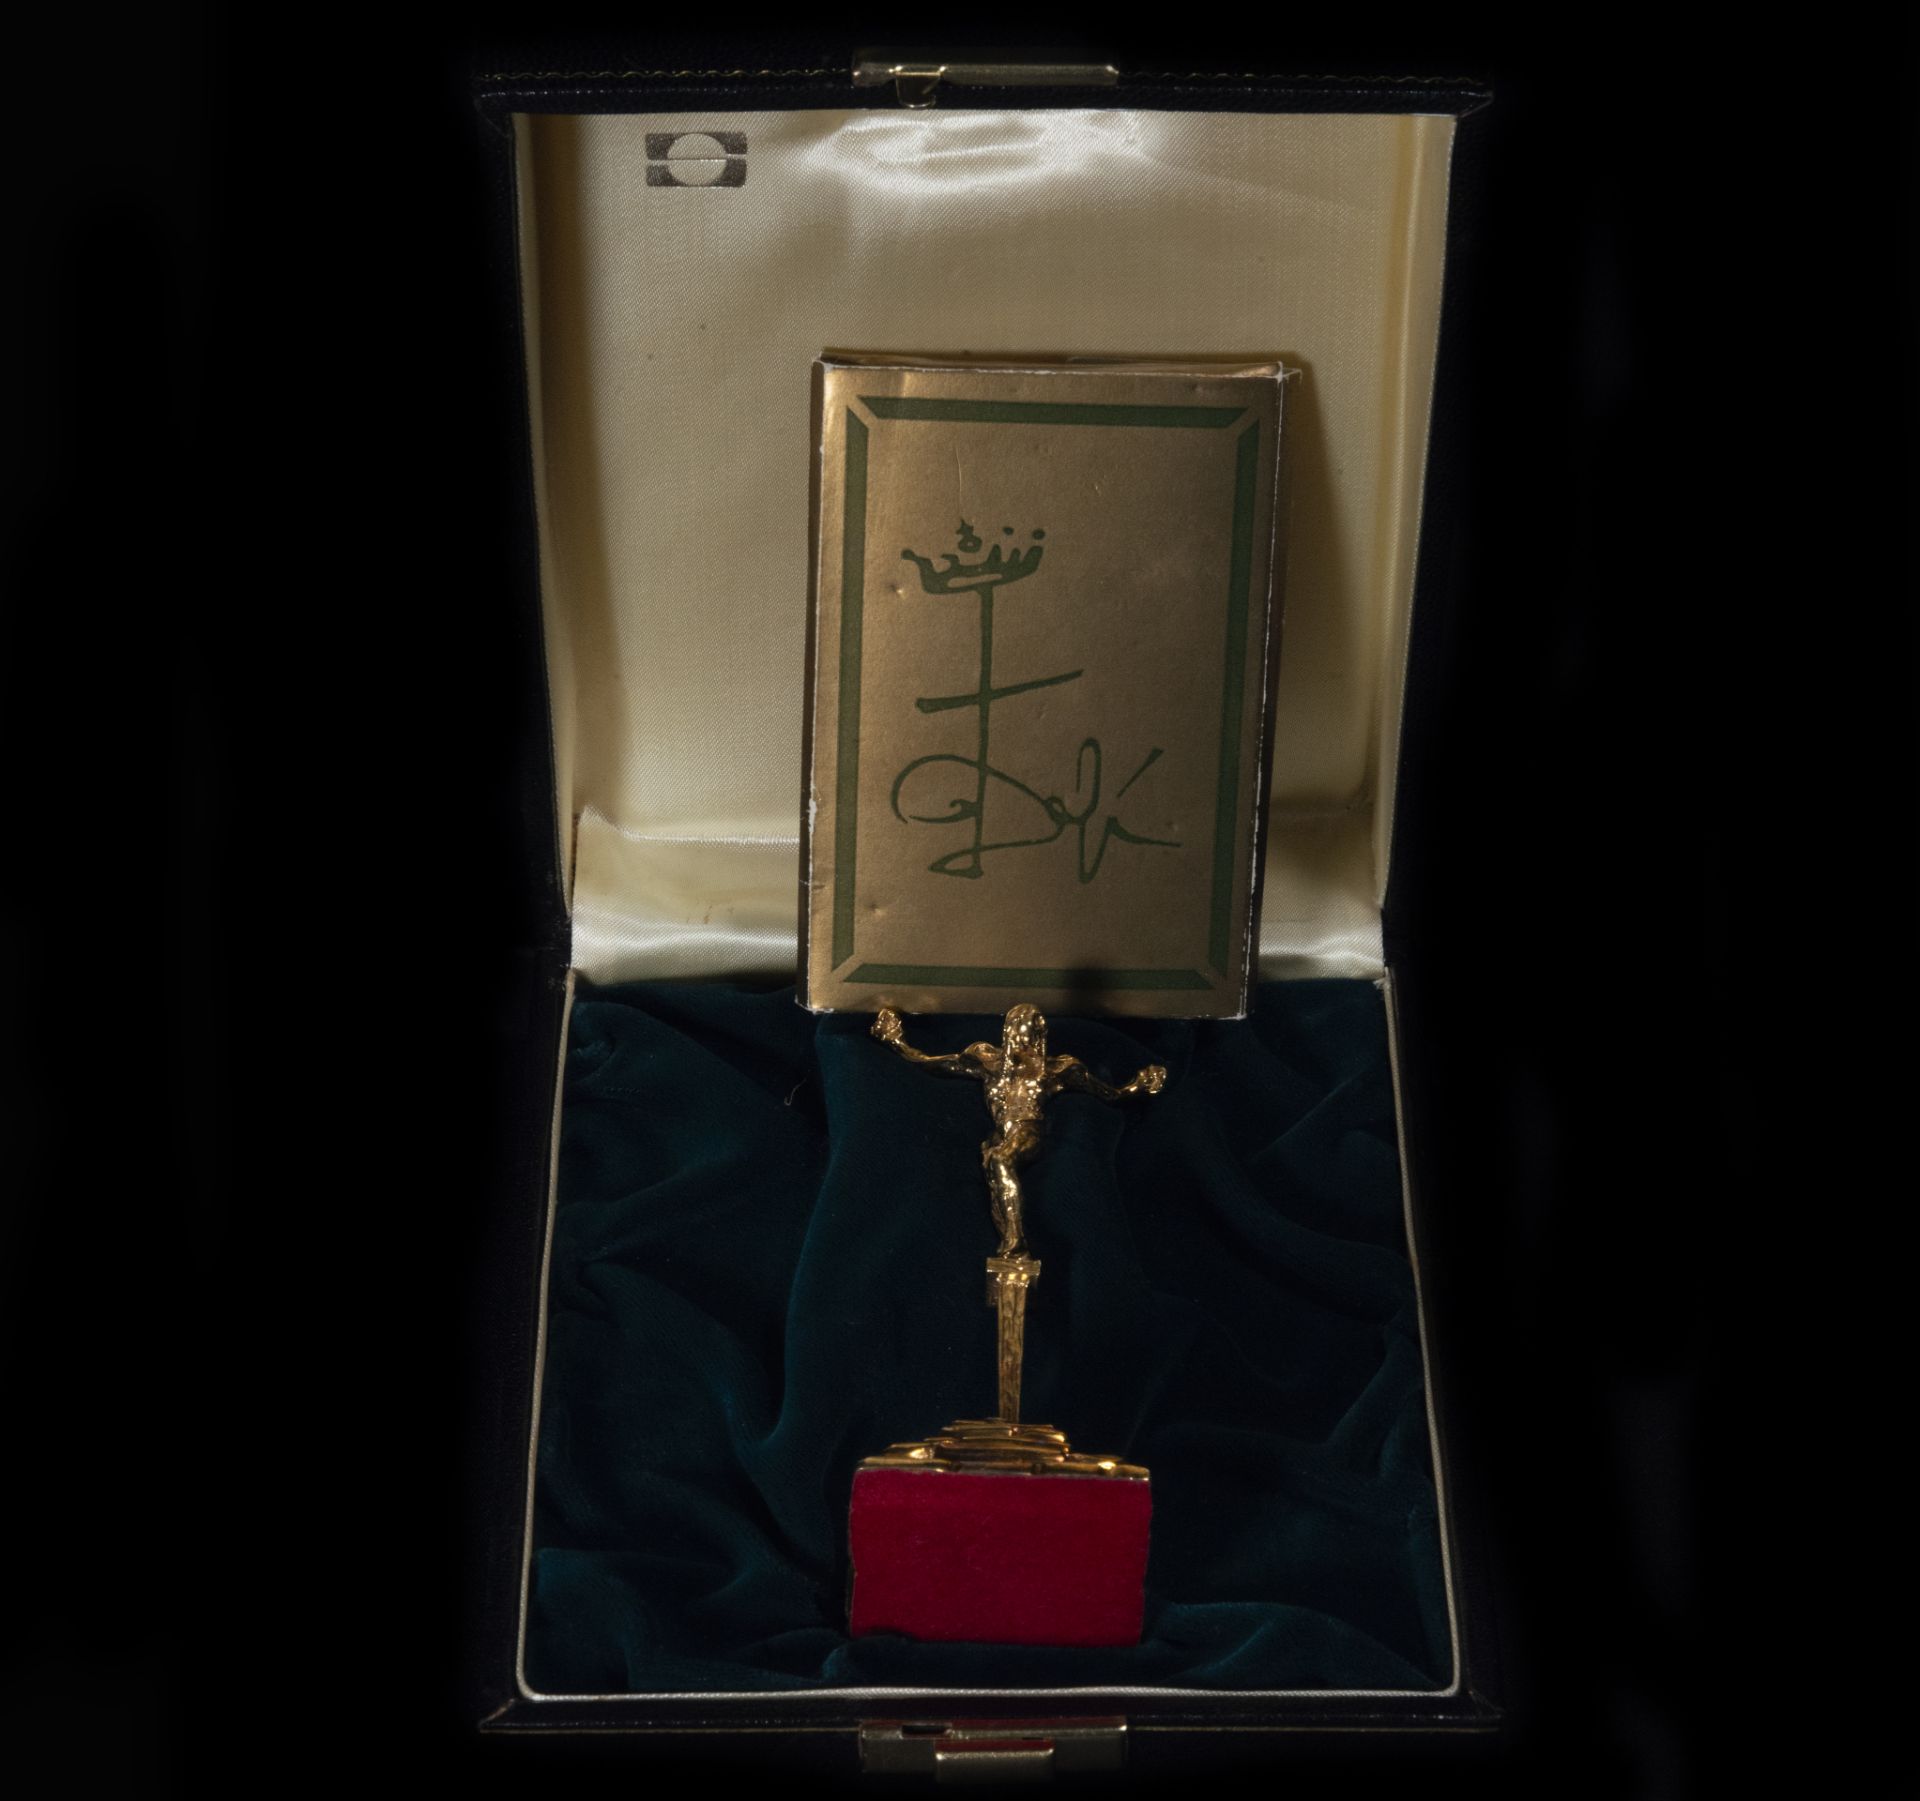 Salvador Dalí (Figueras, 1904 - Figueras, 1989), Saint John of the Cross in solid gold, with certifi - Image 8 of 9